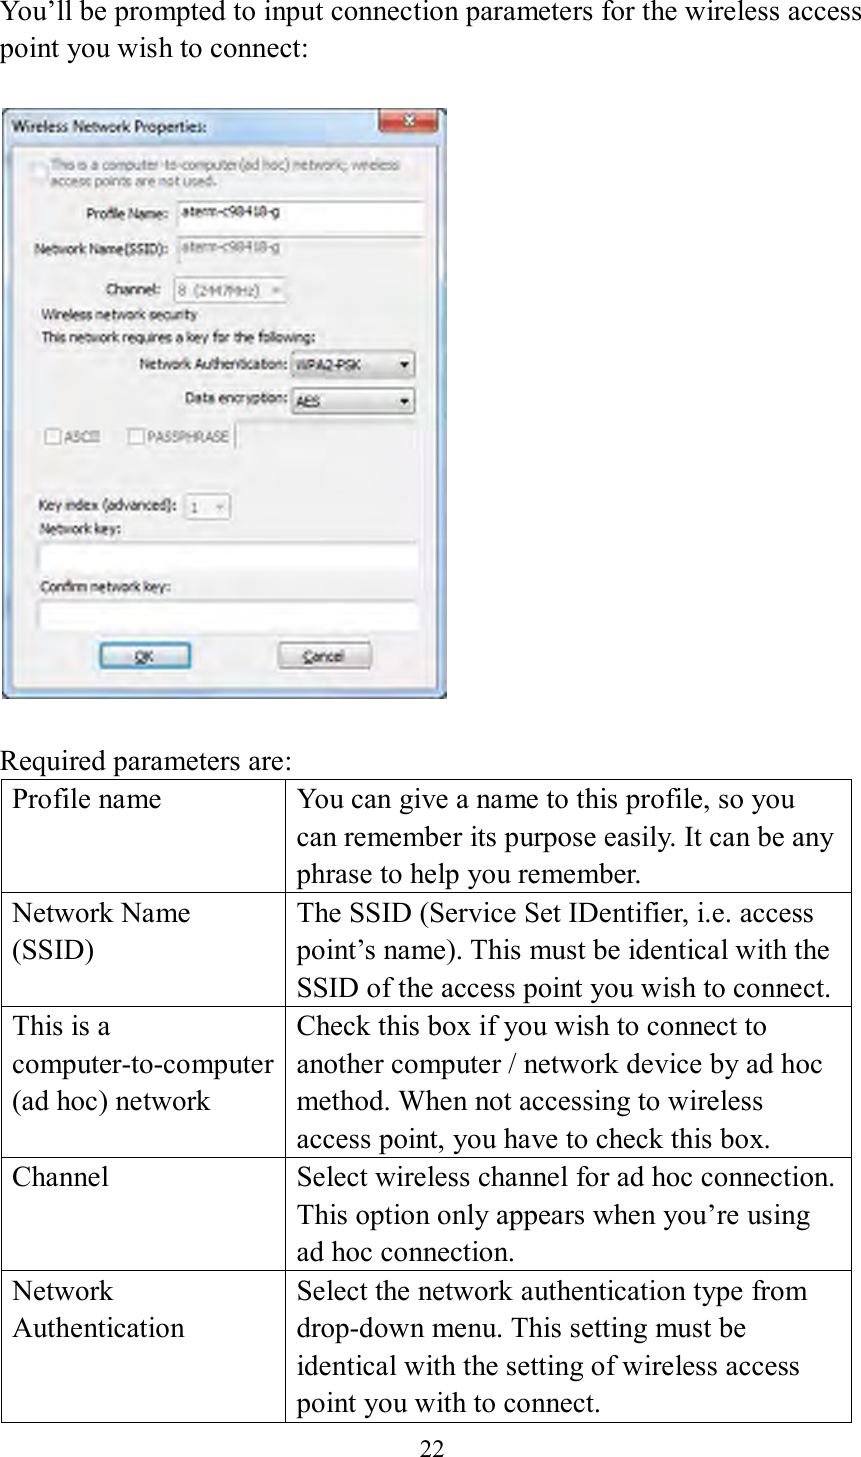 22  You’ll be prompted to input connection parameters for the wireless access point you wish to connect:    Required parameters are: Profile name You can give a name to this profile, so you can remember its purpose easily. It can be any phrase to help you remember. Network Name (SSID) The SSID (Service Set IDentifier, i.e. access point’s name). This must be identical with the SSID of the access point you wish to connect. This is a computer-to-computer (ad hoc) network Check this box if you wish to connect to another computer / network device by ad hoc method. When not accessing to wireless access point, you have to check this box. Channel Select wireless channel for ad hoc connection. This option only appears when you’re using ad hoc connection. Network   Authentication Select the network authentication type from drop-down menu. This setting must be identical with the setting of wireless access point you with to connect. 